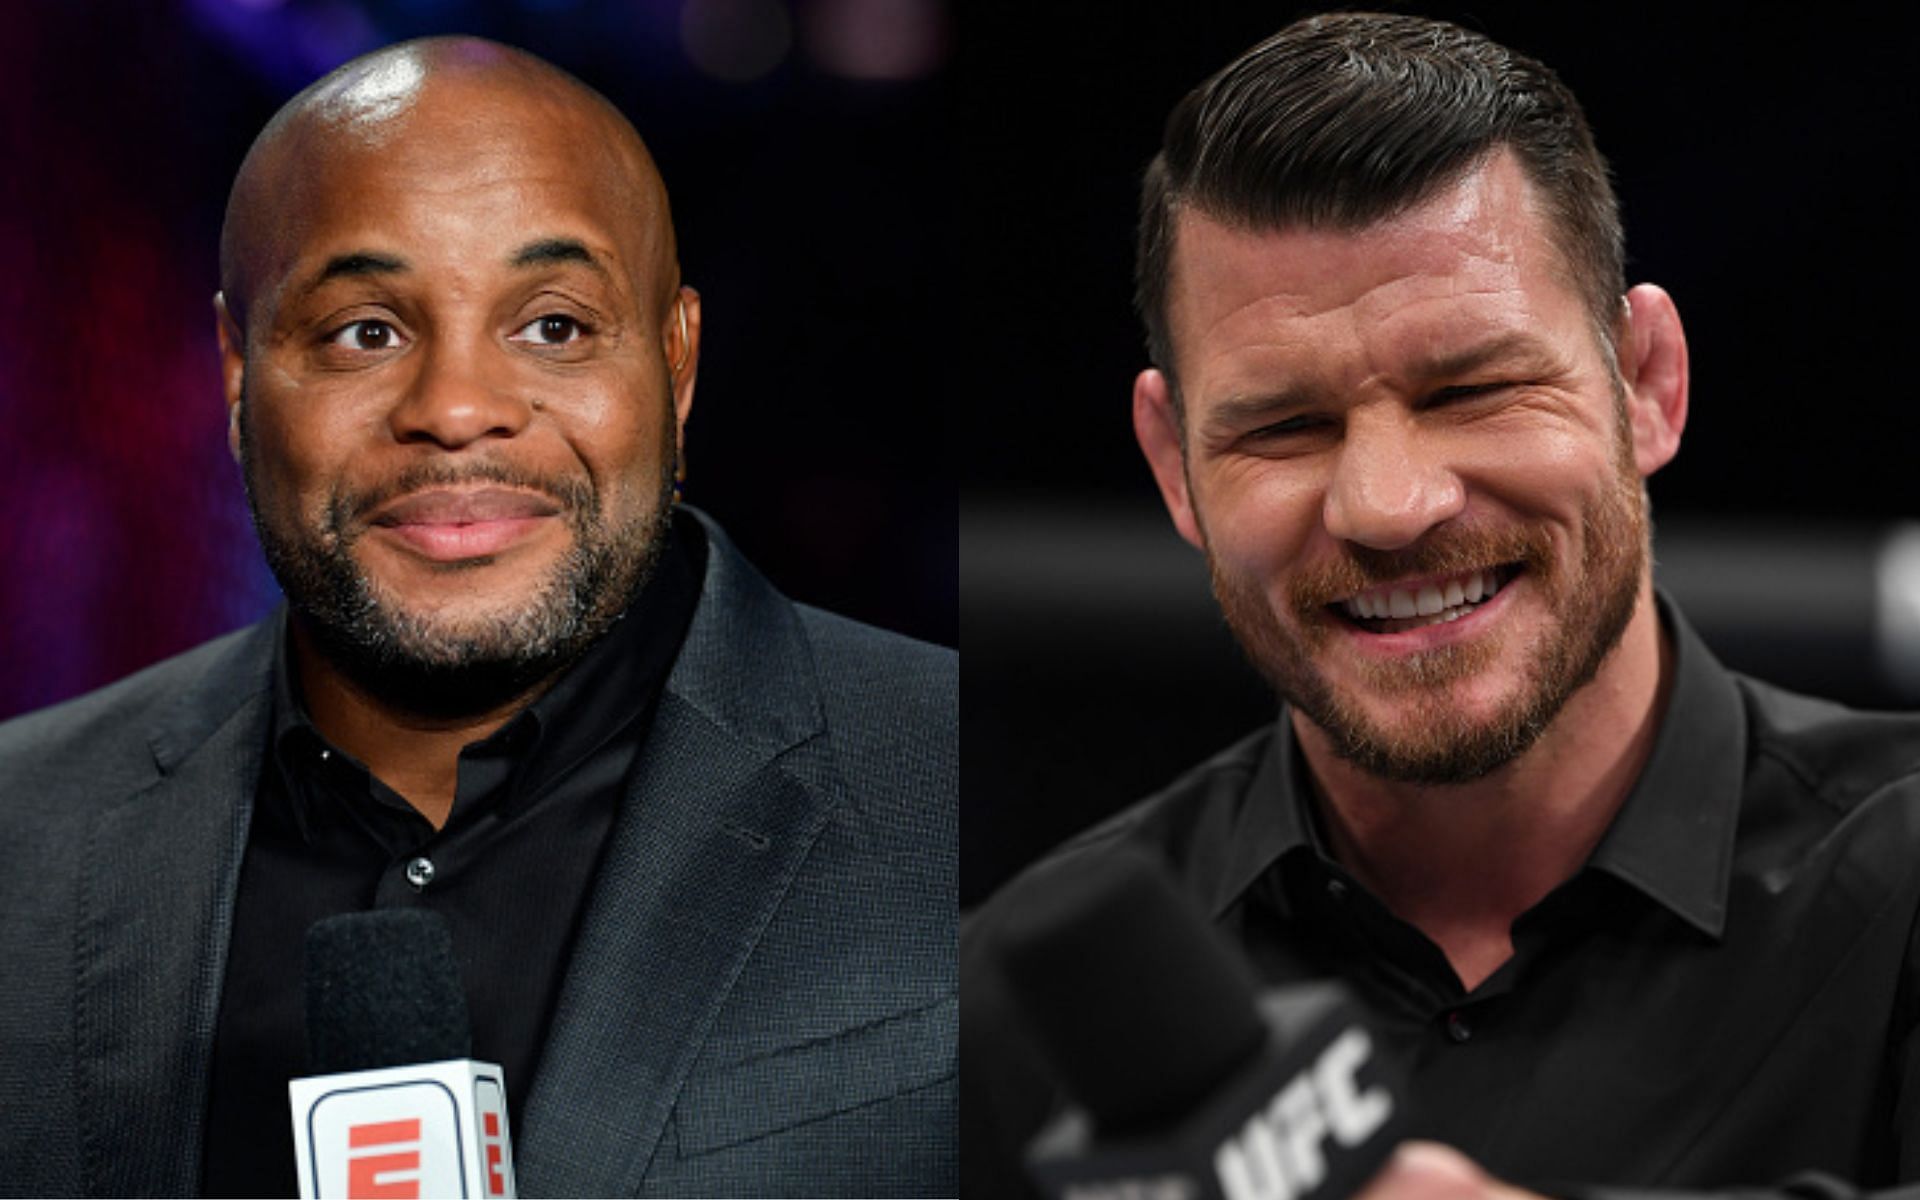 Daniel Cormier (left), Michael Bisping (right) [Images courtesy: Getty]